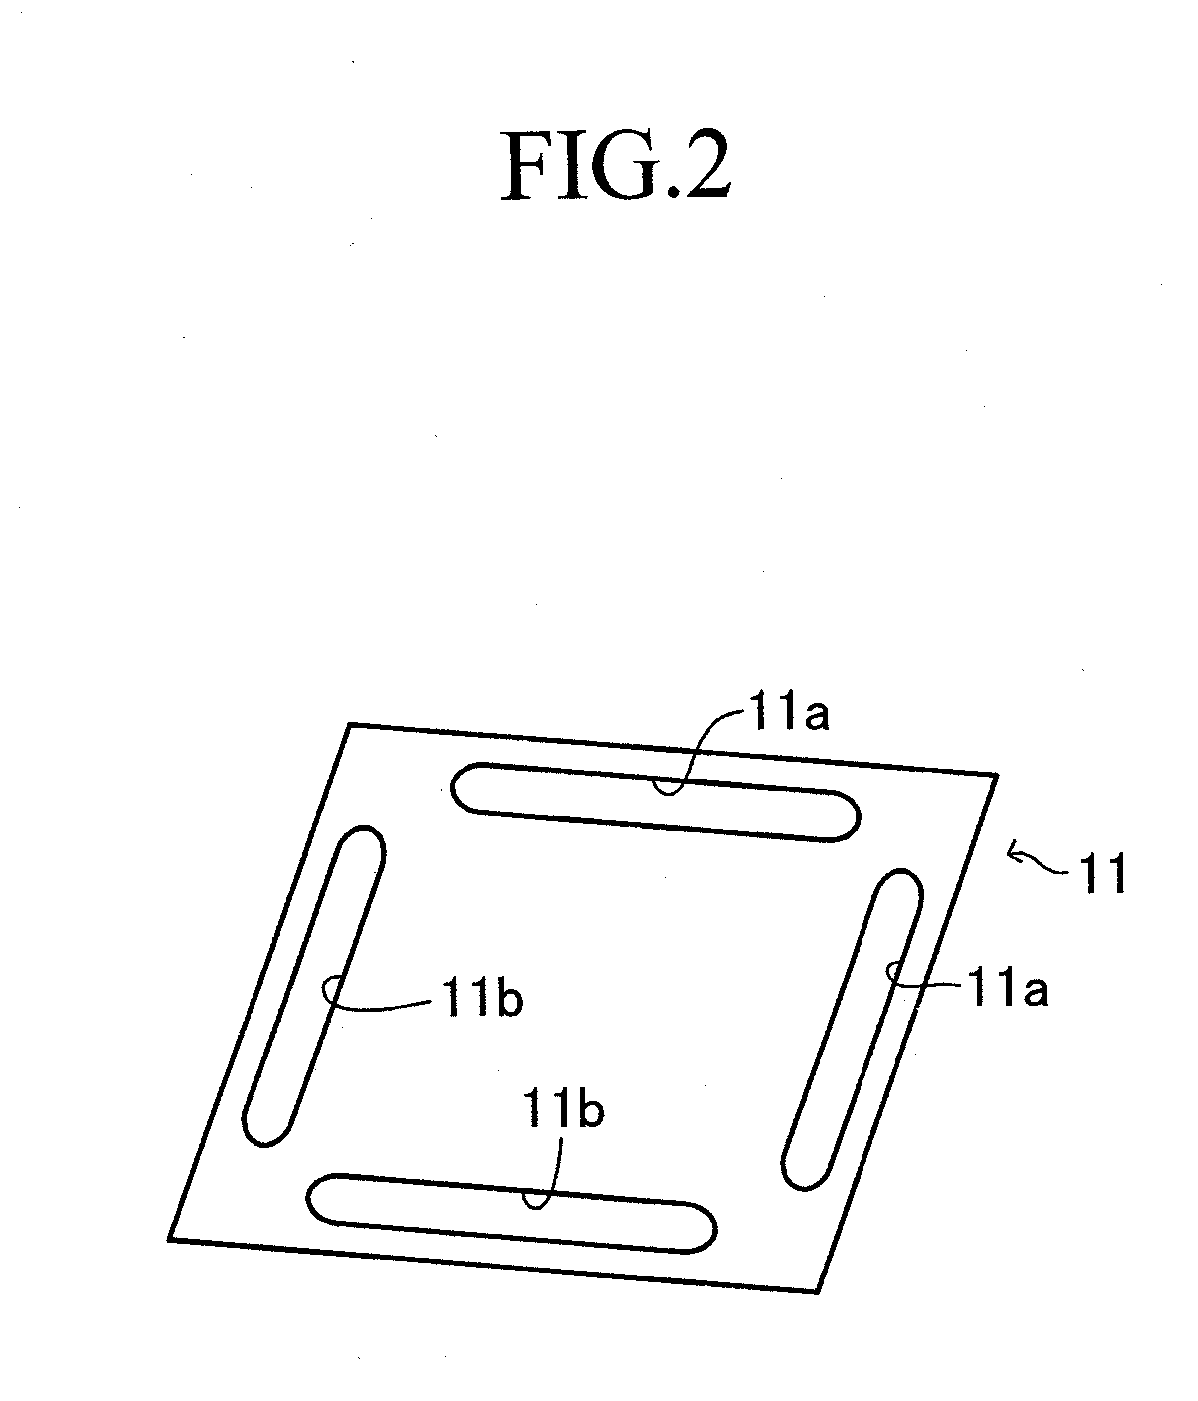 Method of forming gas diffusion layer for fuel cell